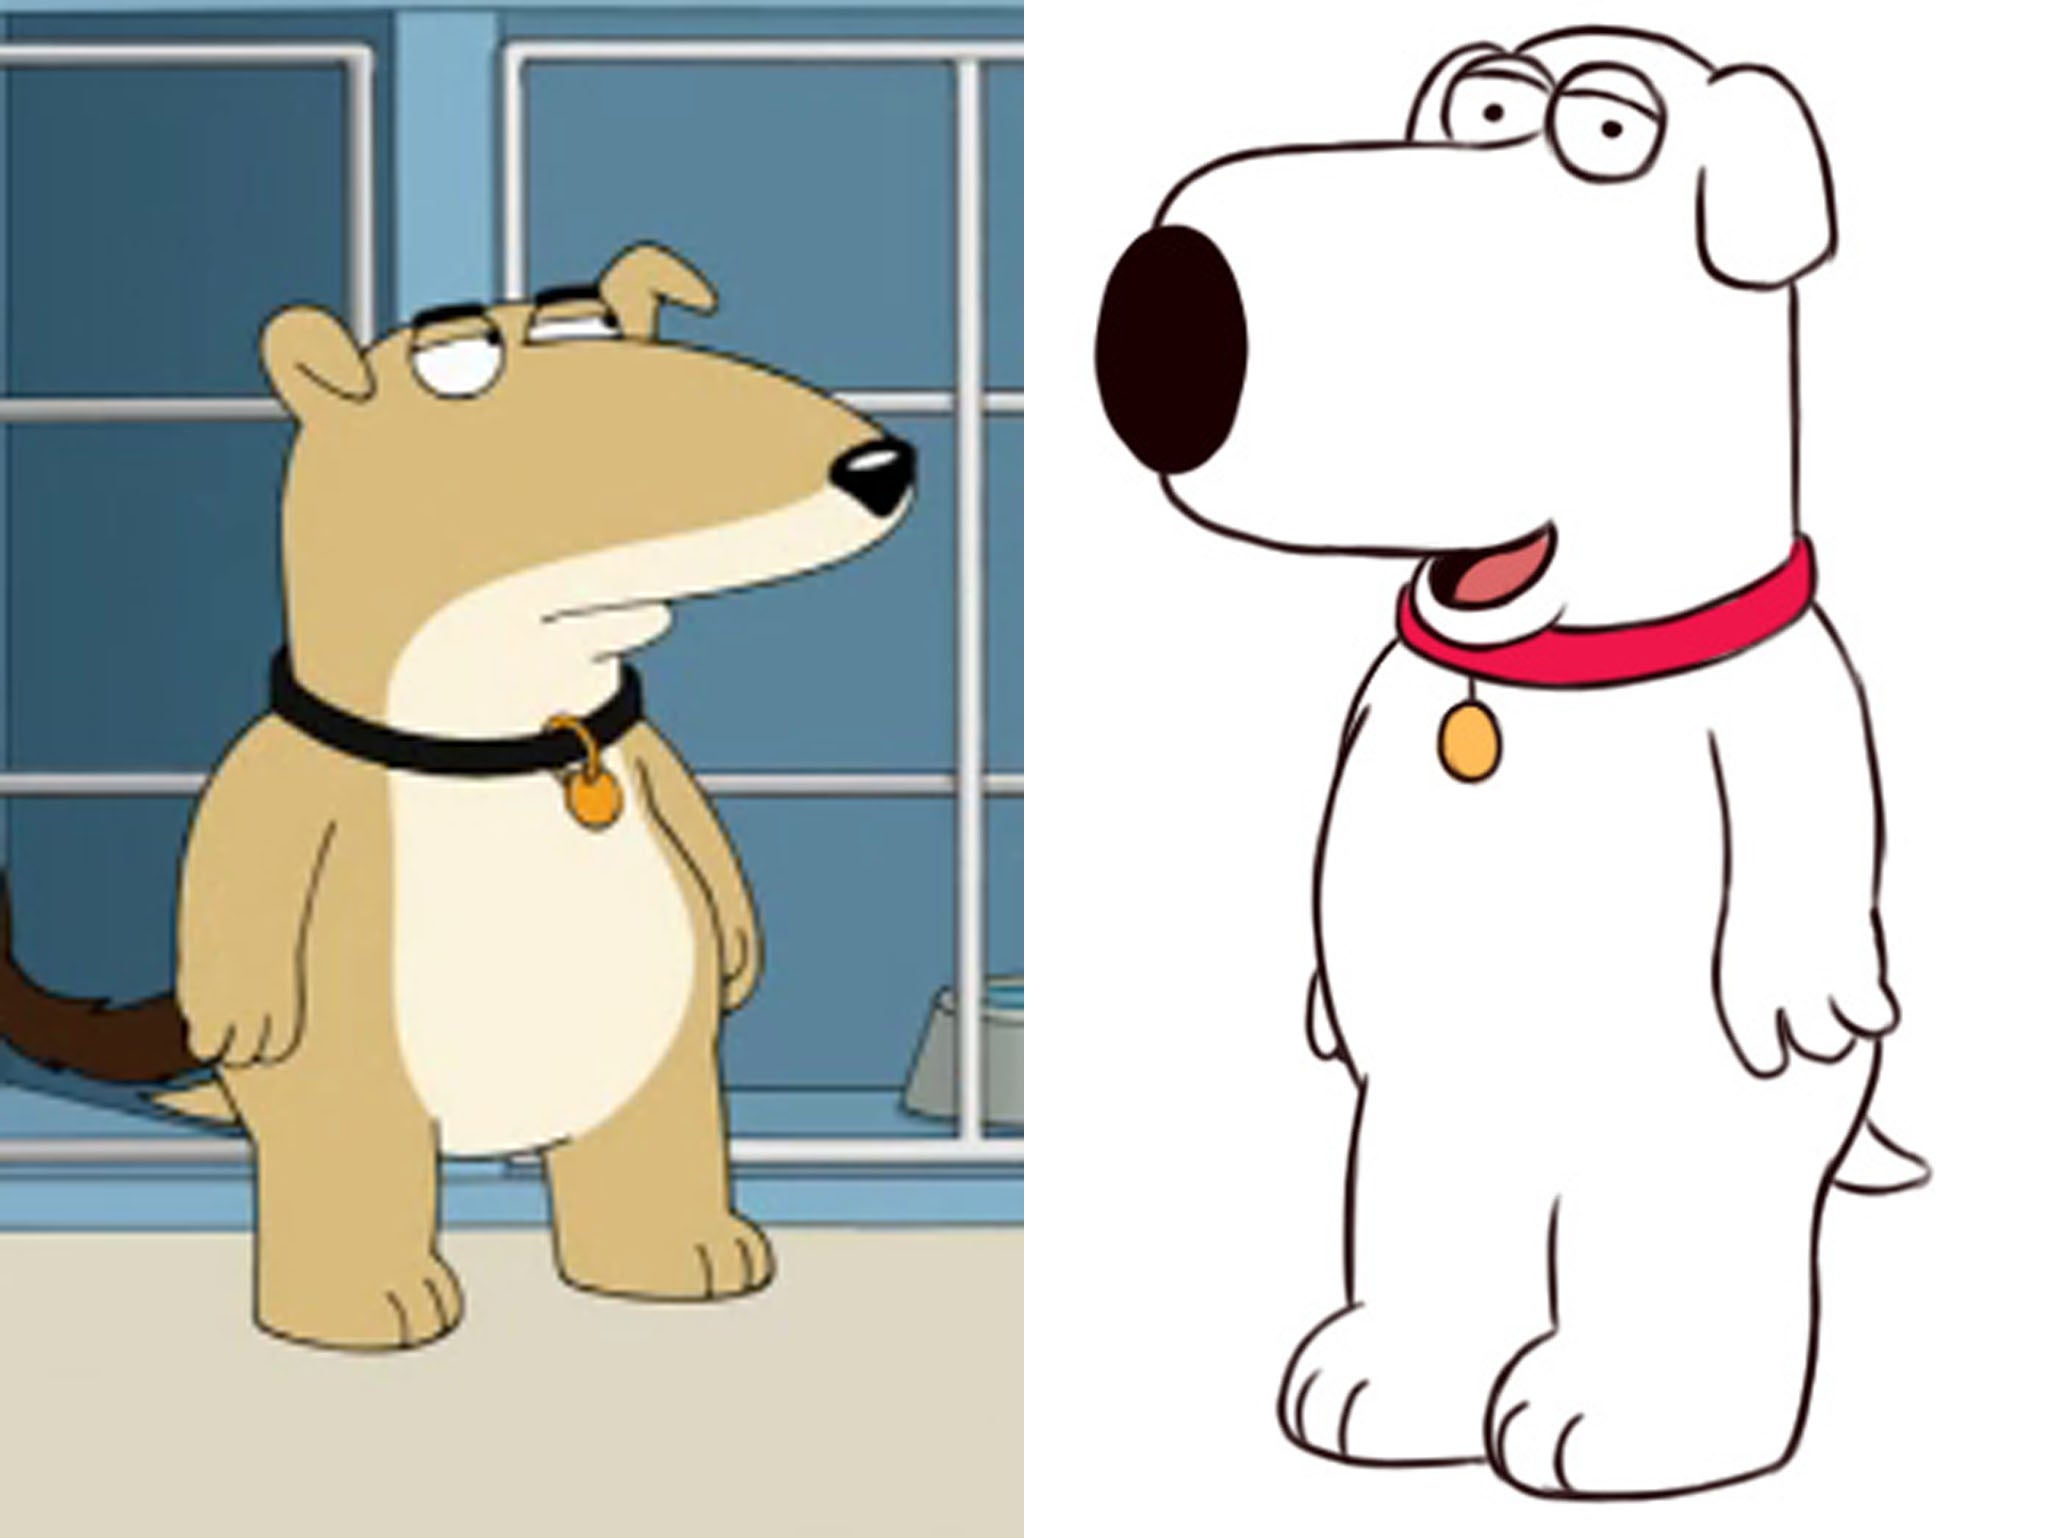 Vinny, on the left, has replaced long-standing Family Guy favourite Brian as the Griffins' pet dog